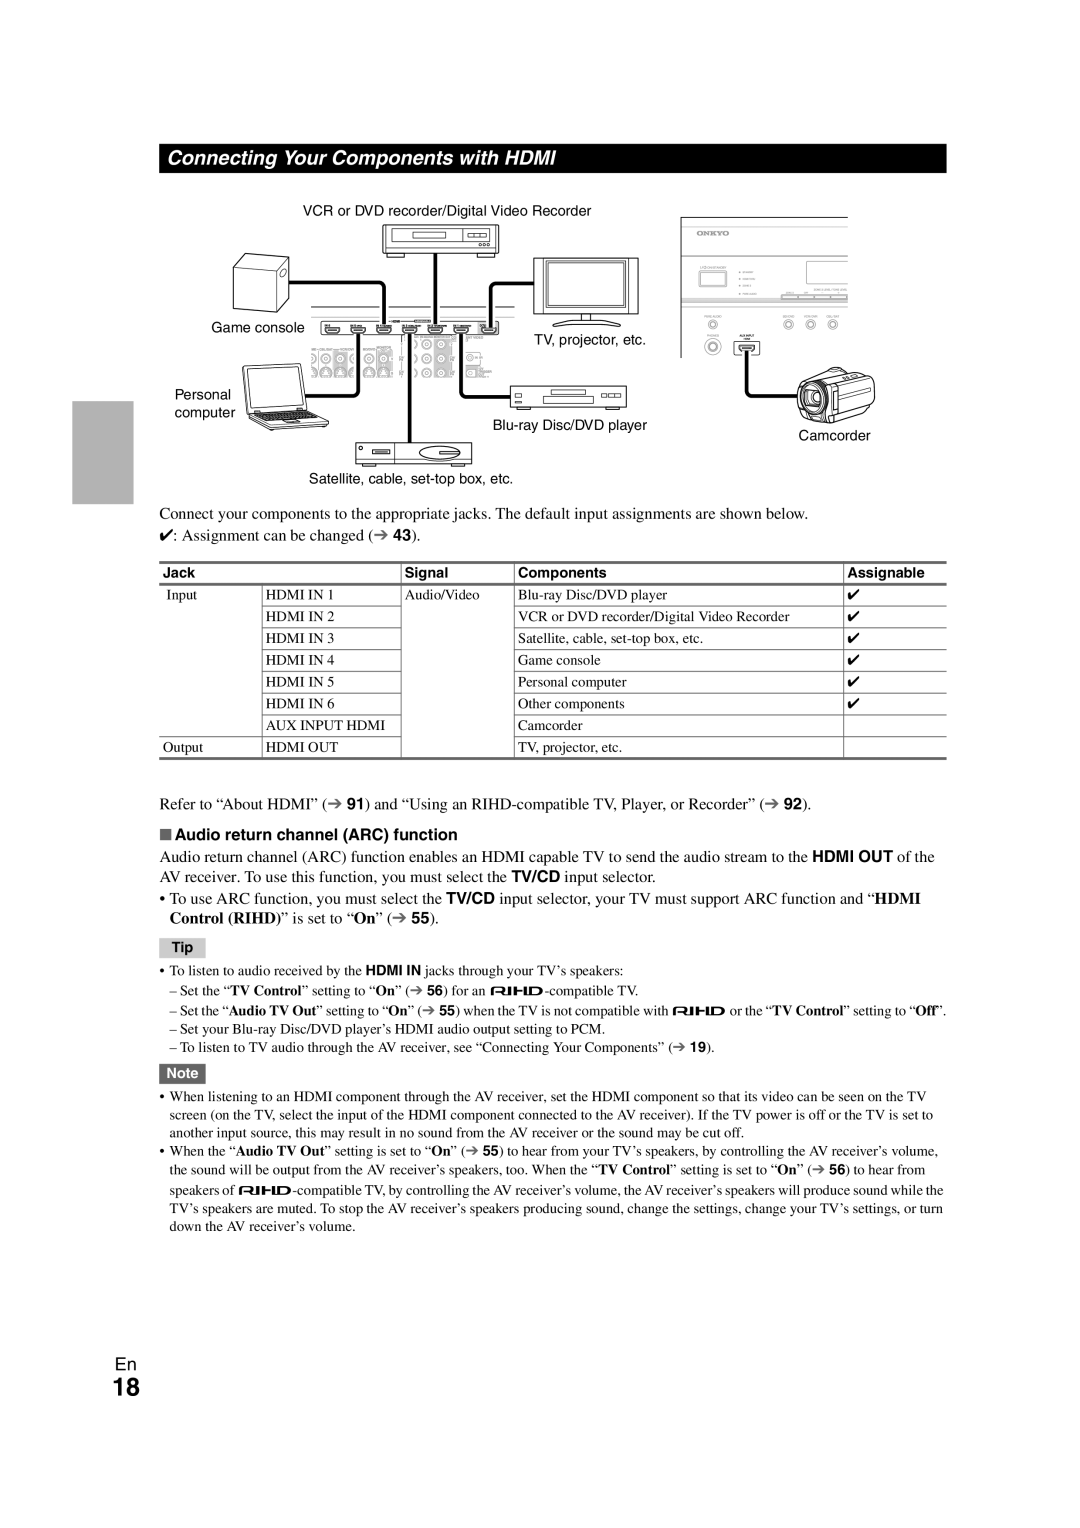 Onkyo TX-NR708 instruction manual Connecting Your Components with HDMI, Audio return channel ARC function 